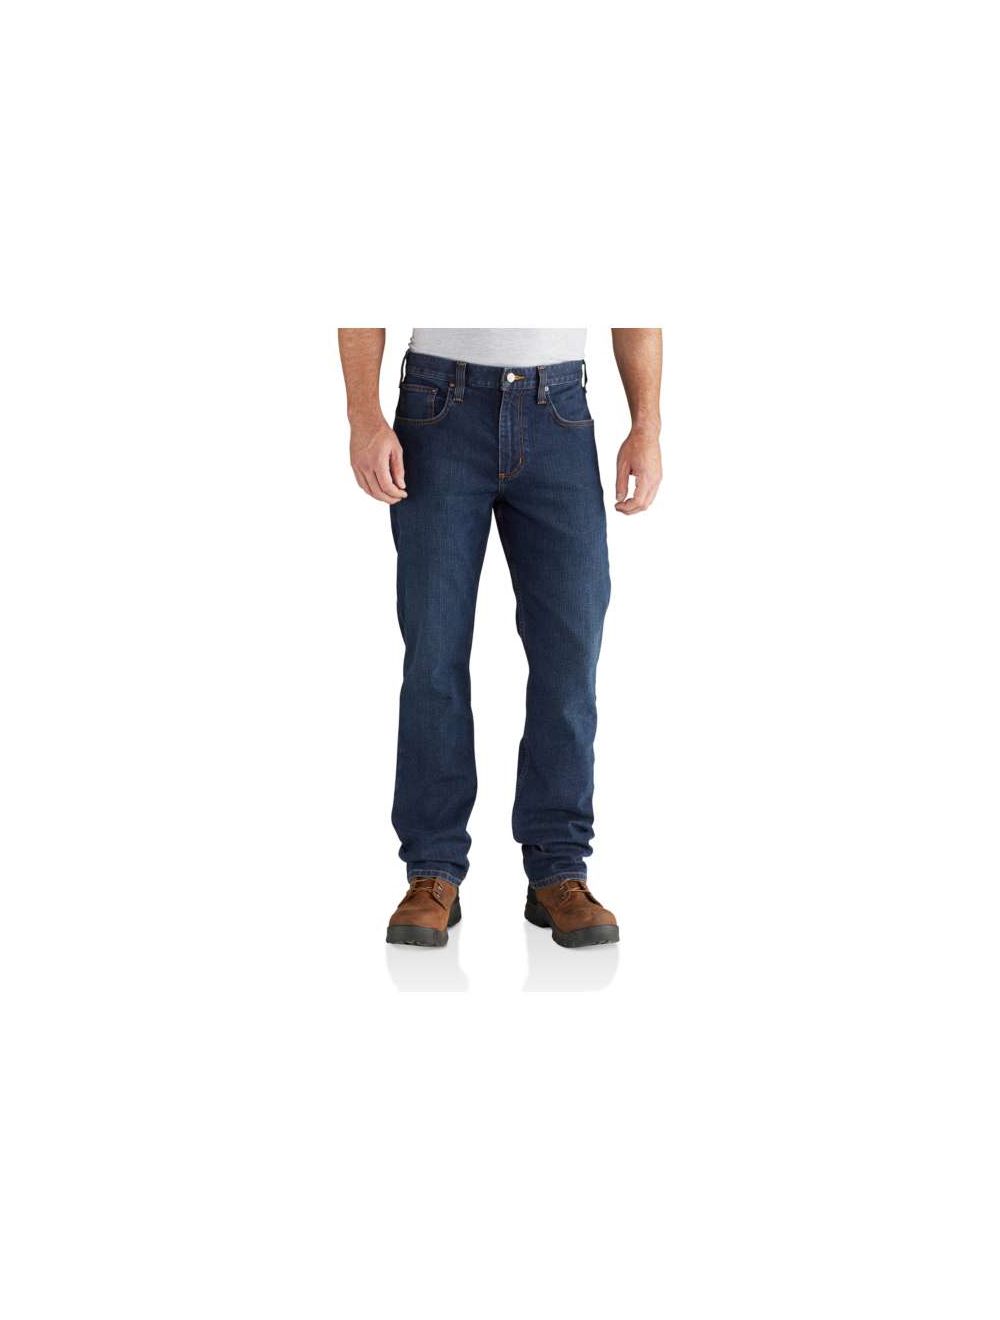 Carhartt Rugged Flex Relaxed-Fit Straight-Leg Jeans for Men